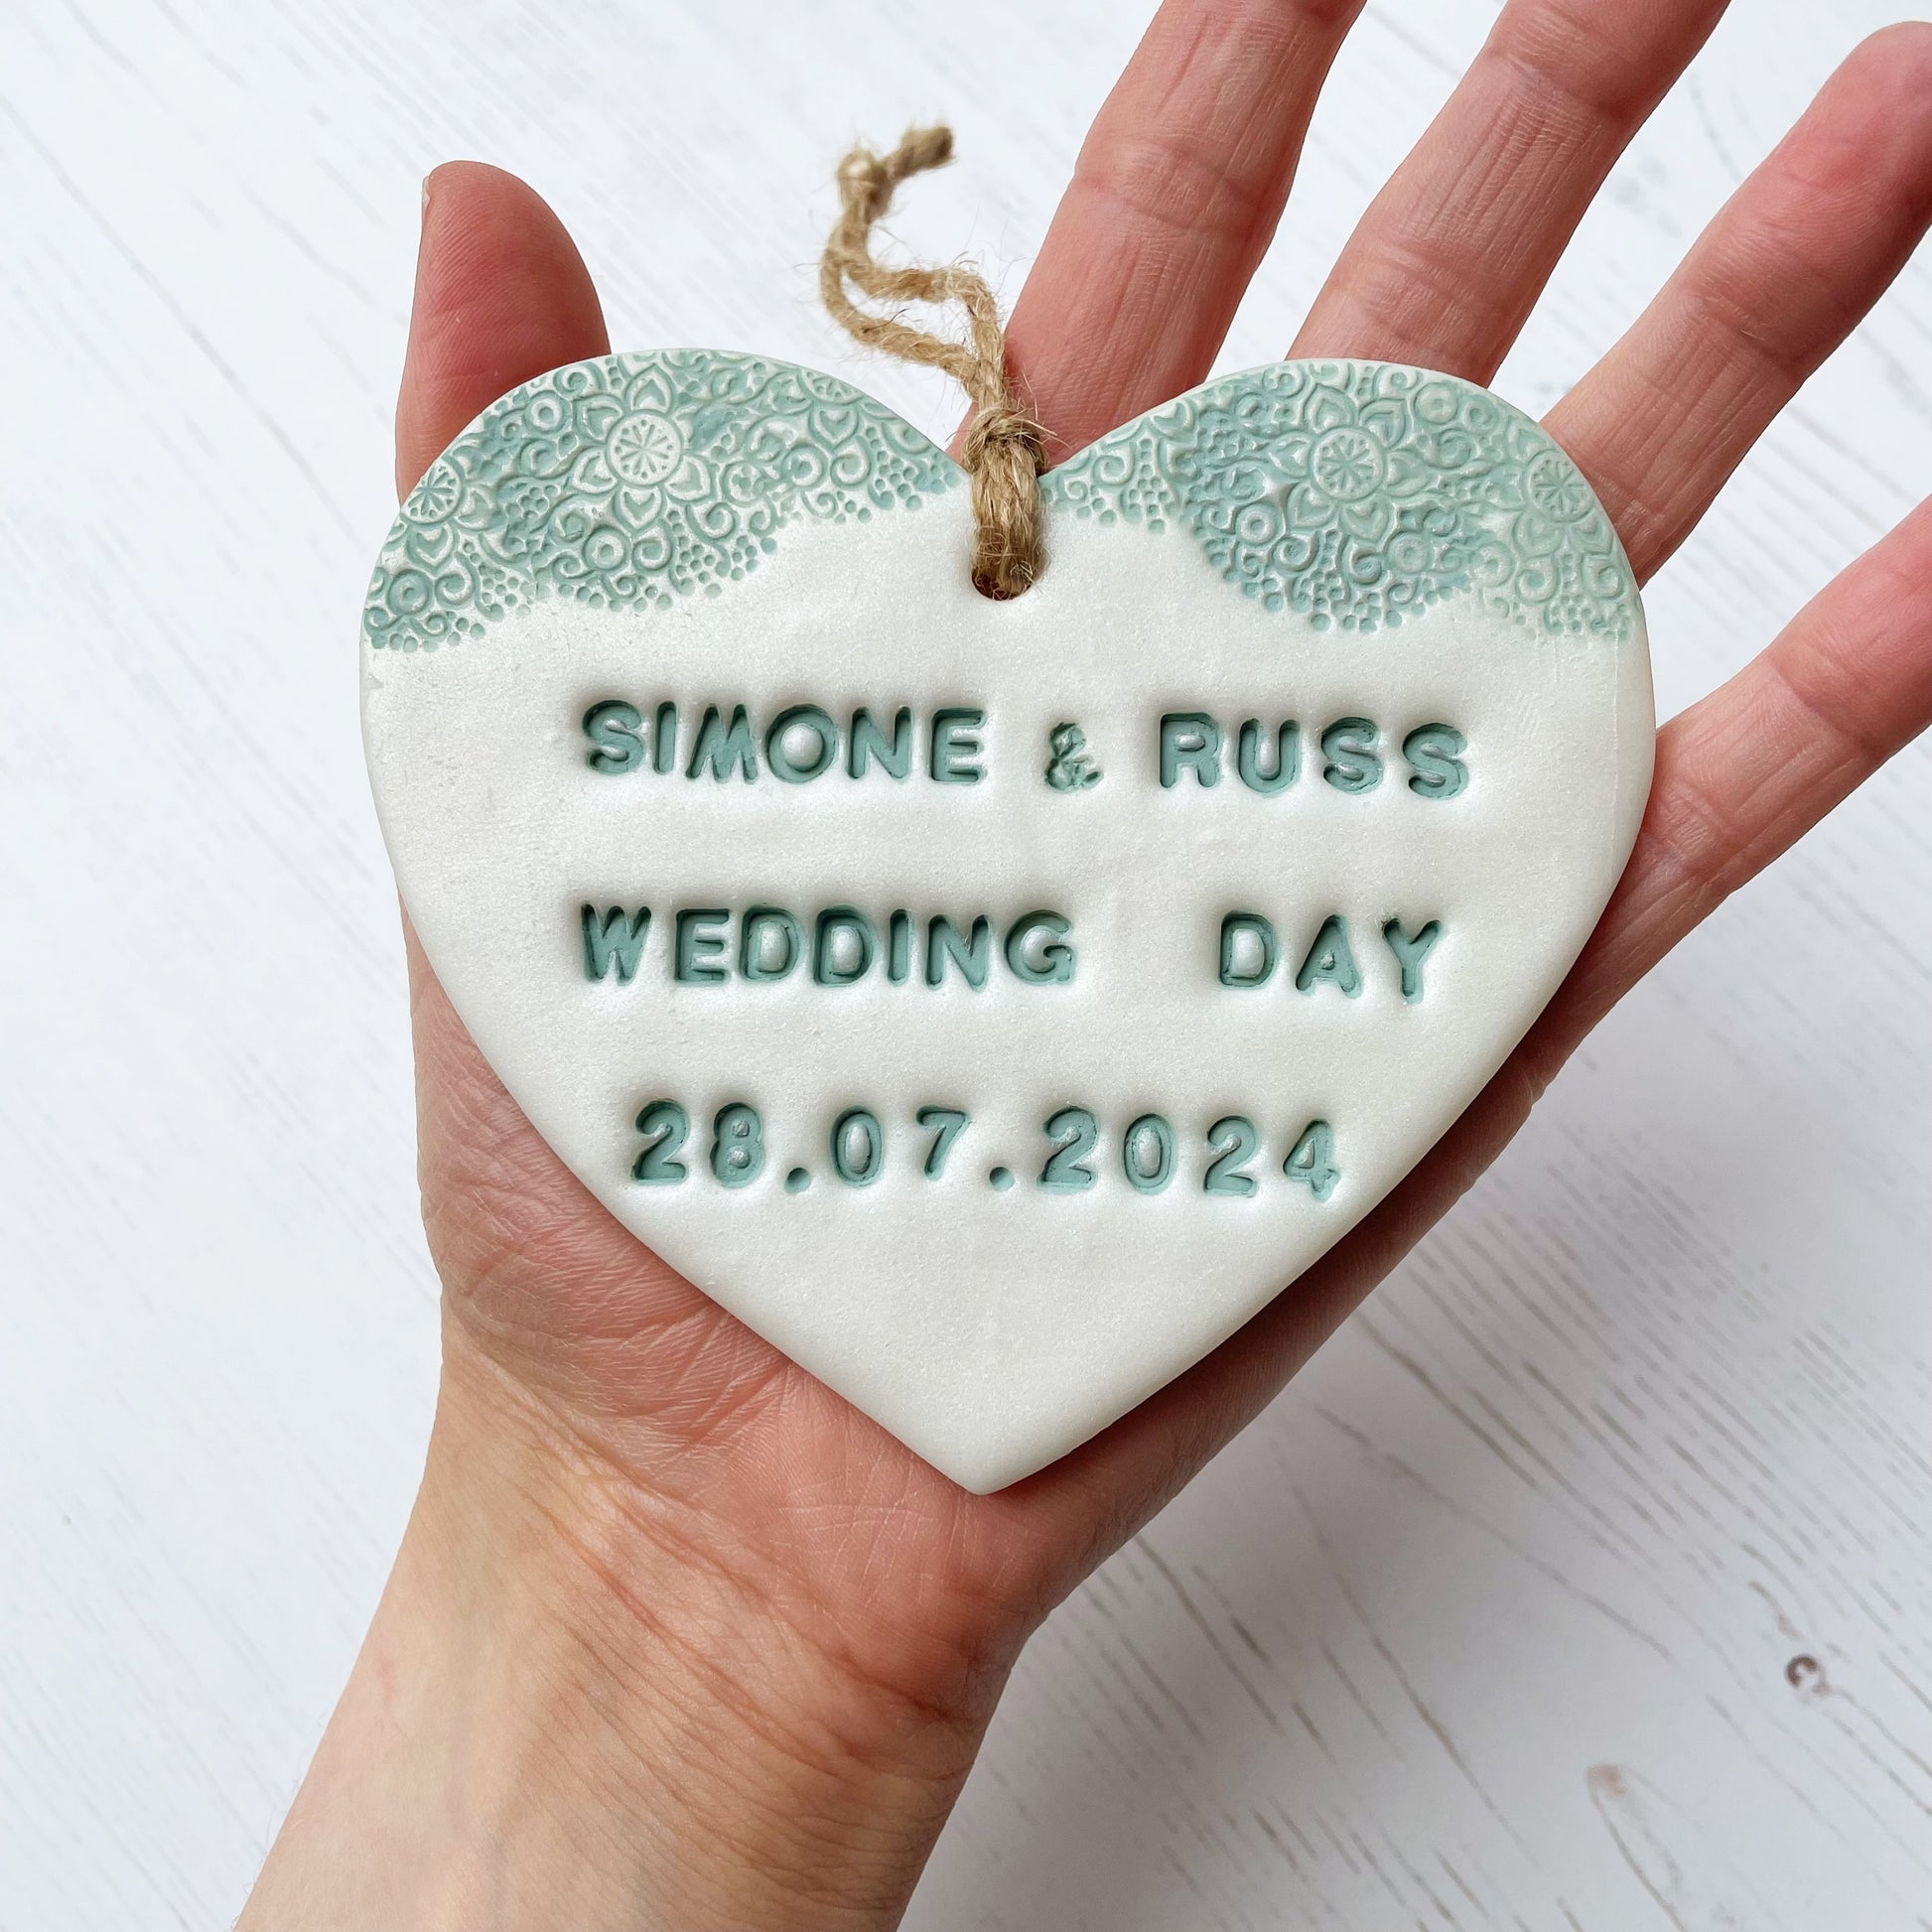 Personalised wedding gift, pearlised white clay heart with a sage green lace edge at the top of the heart with twine to hang, the heart is personalised with SIMONE & RUSS WEDDING DAY 28.07.2024